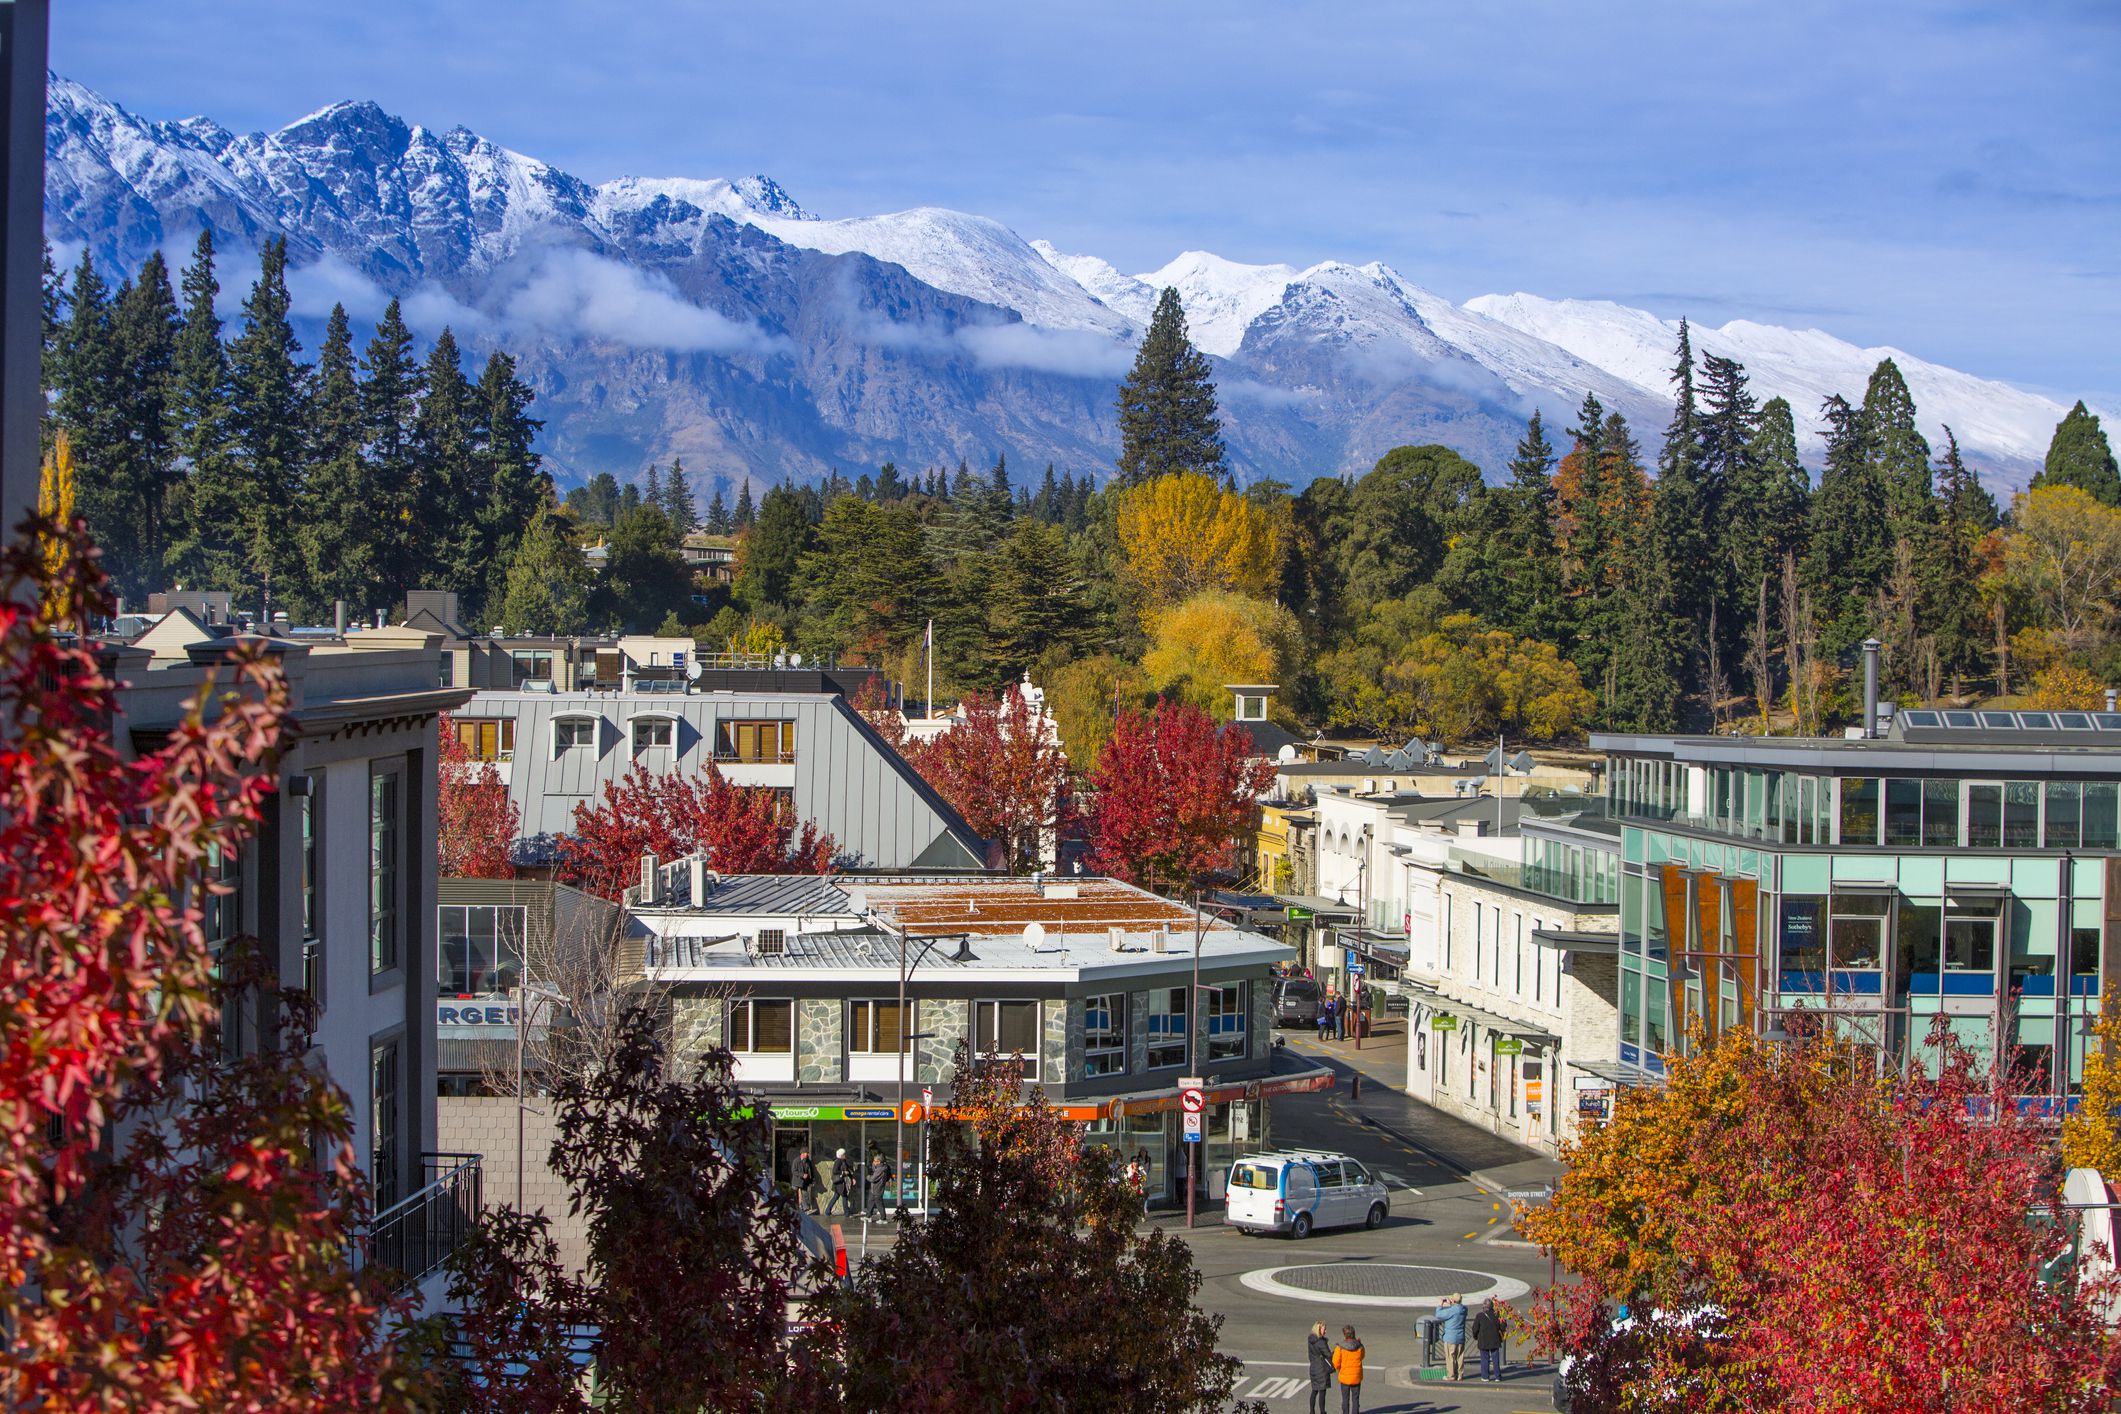 The beautiful colors of Queenstown in the fall.